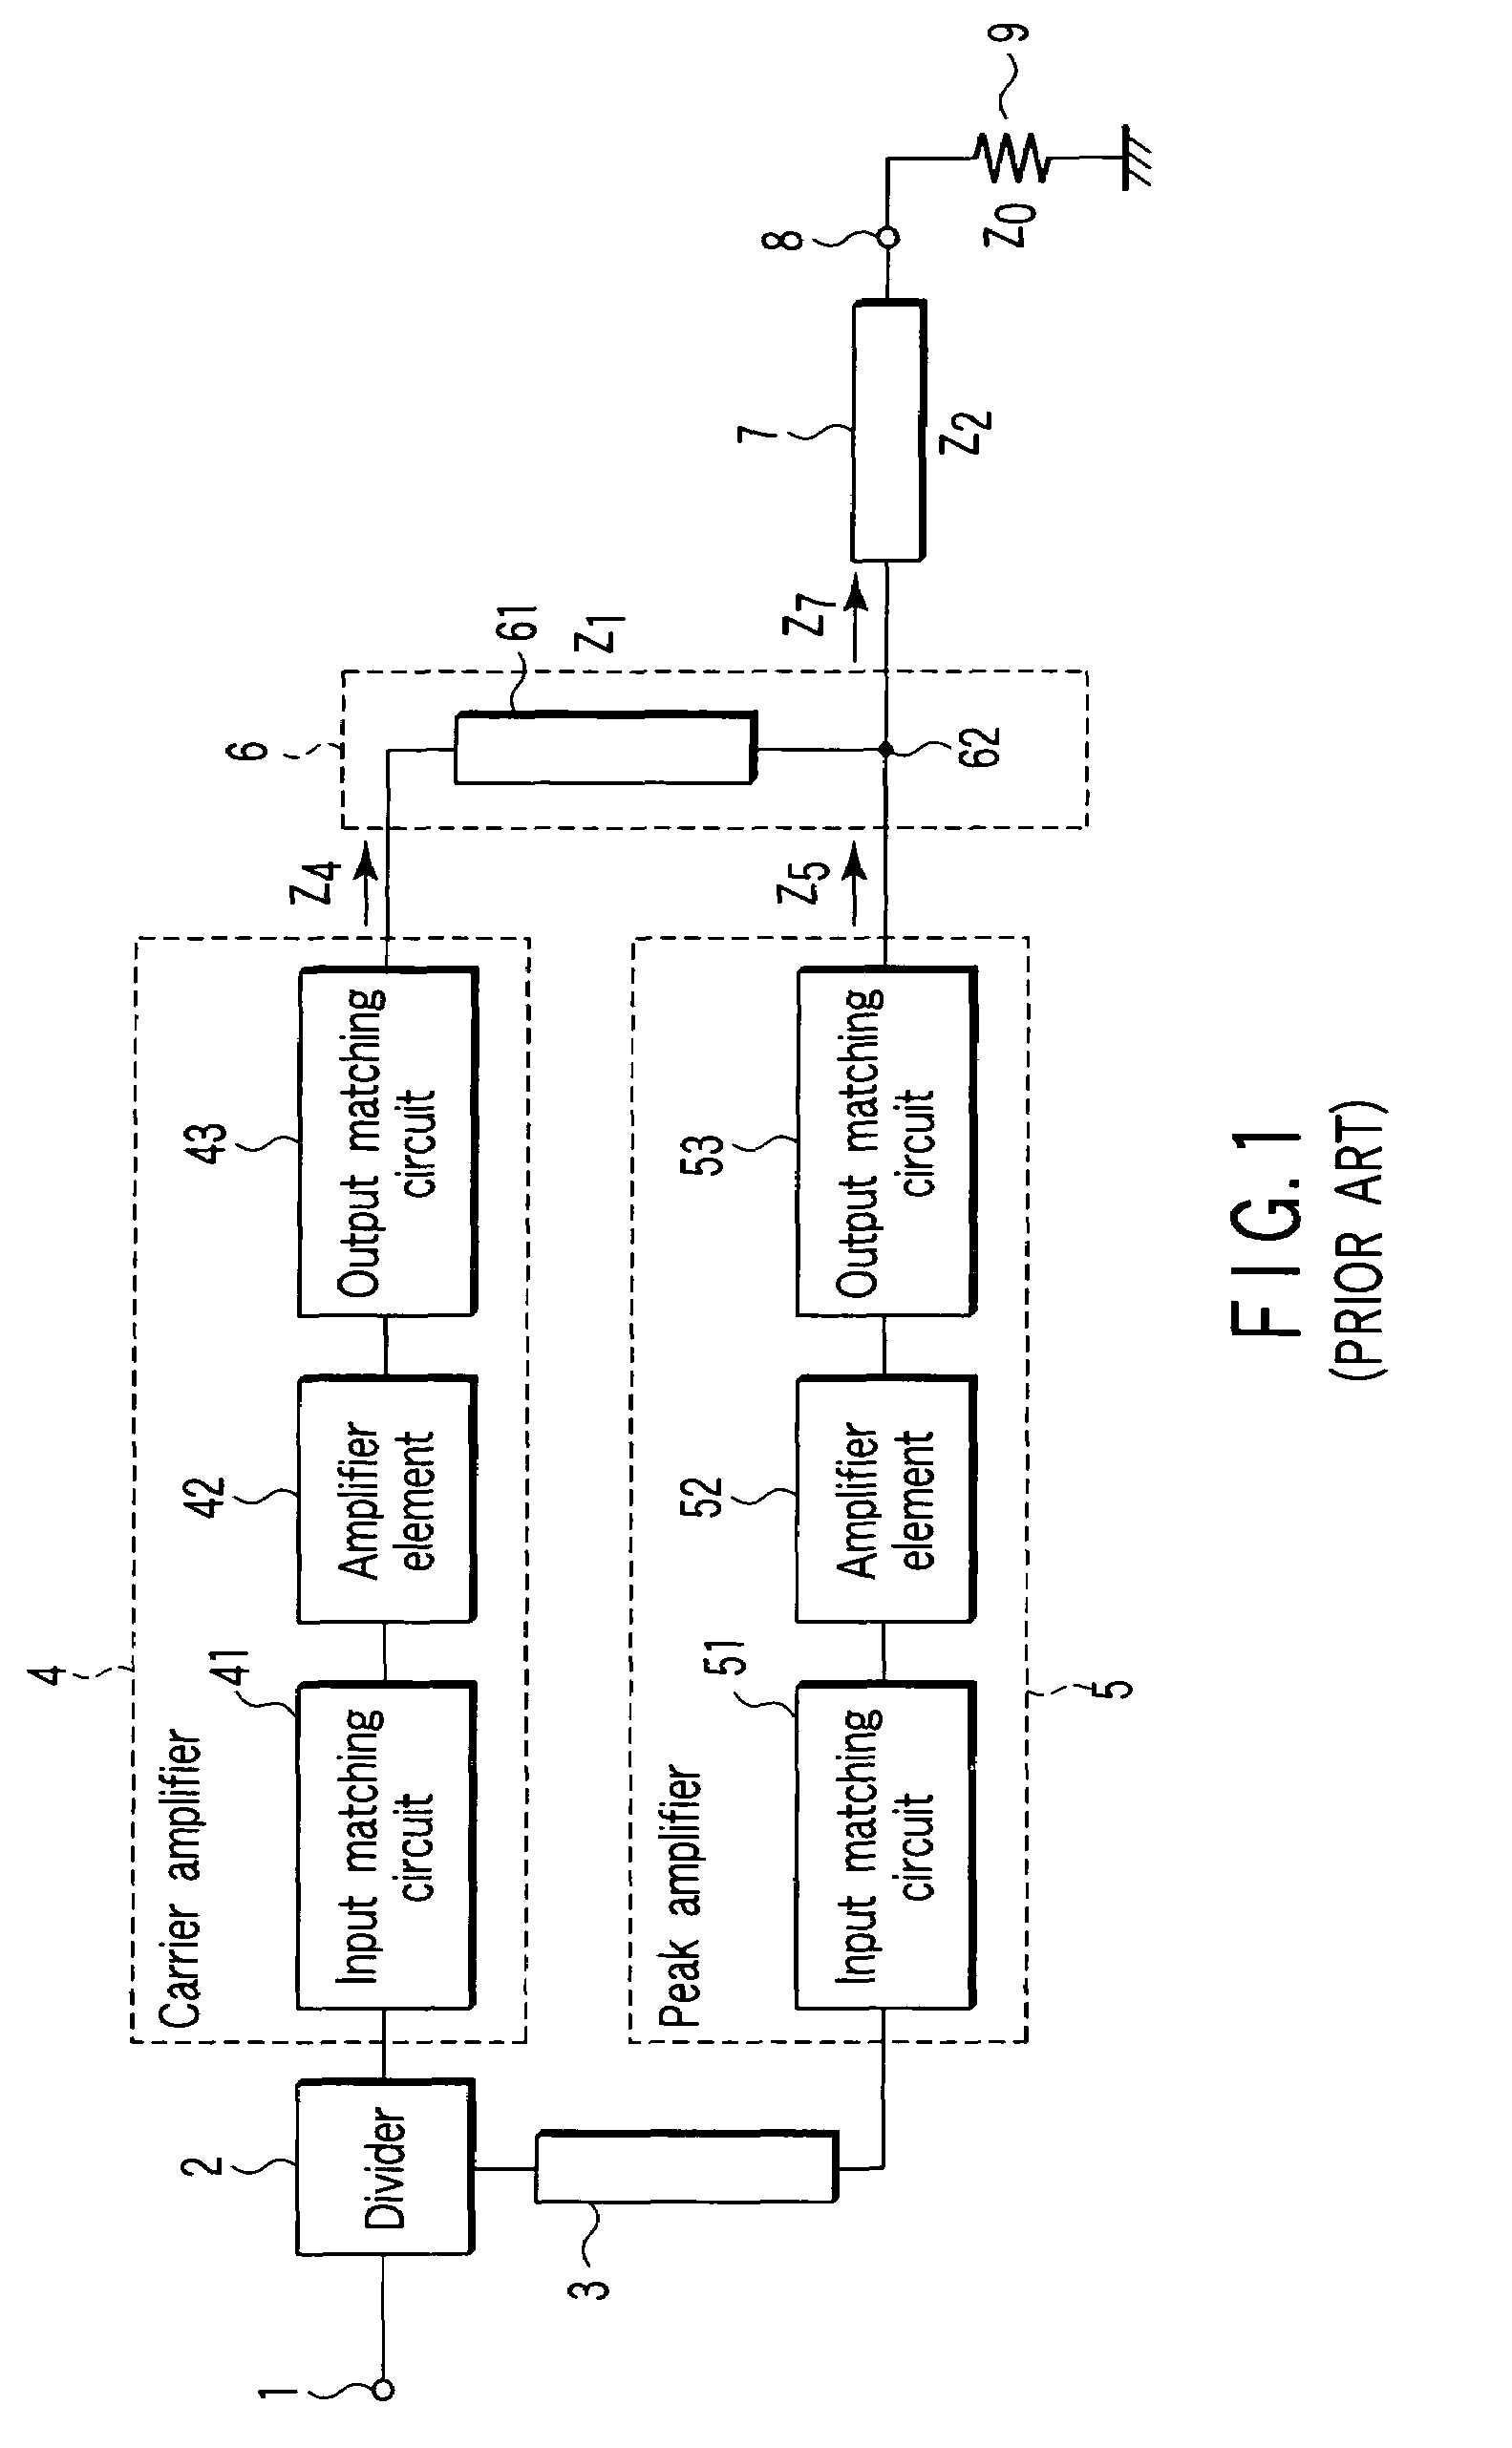 Doherty amplifier with improved linearity